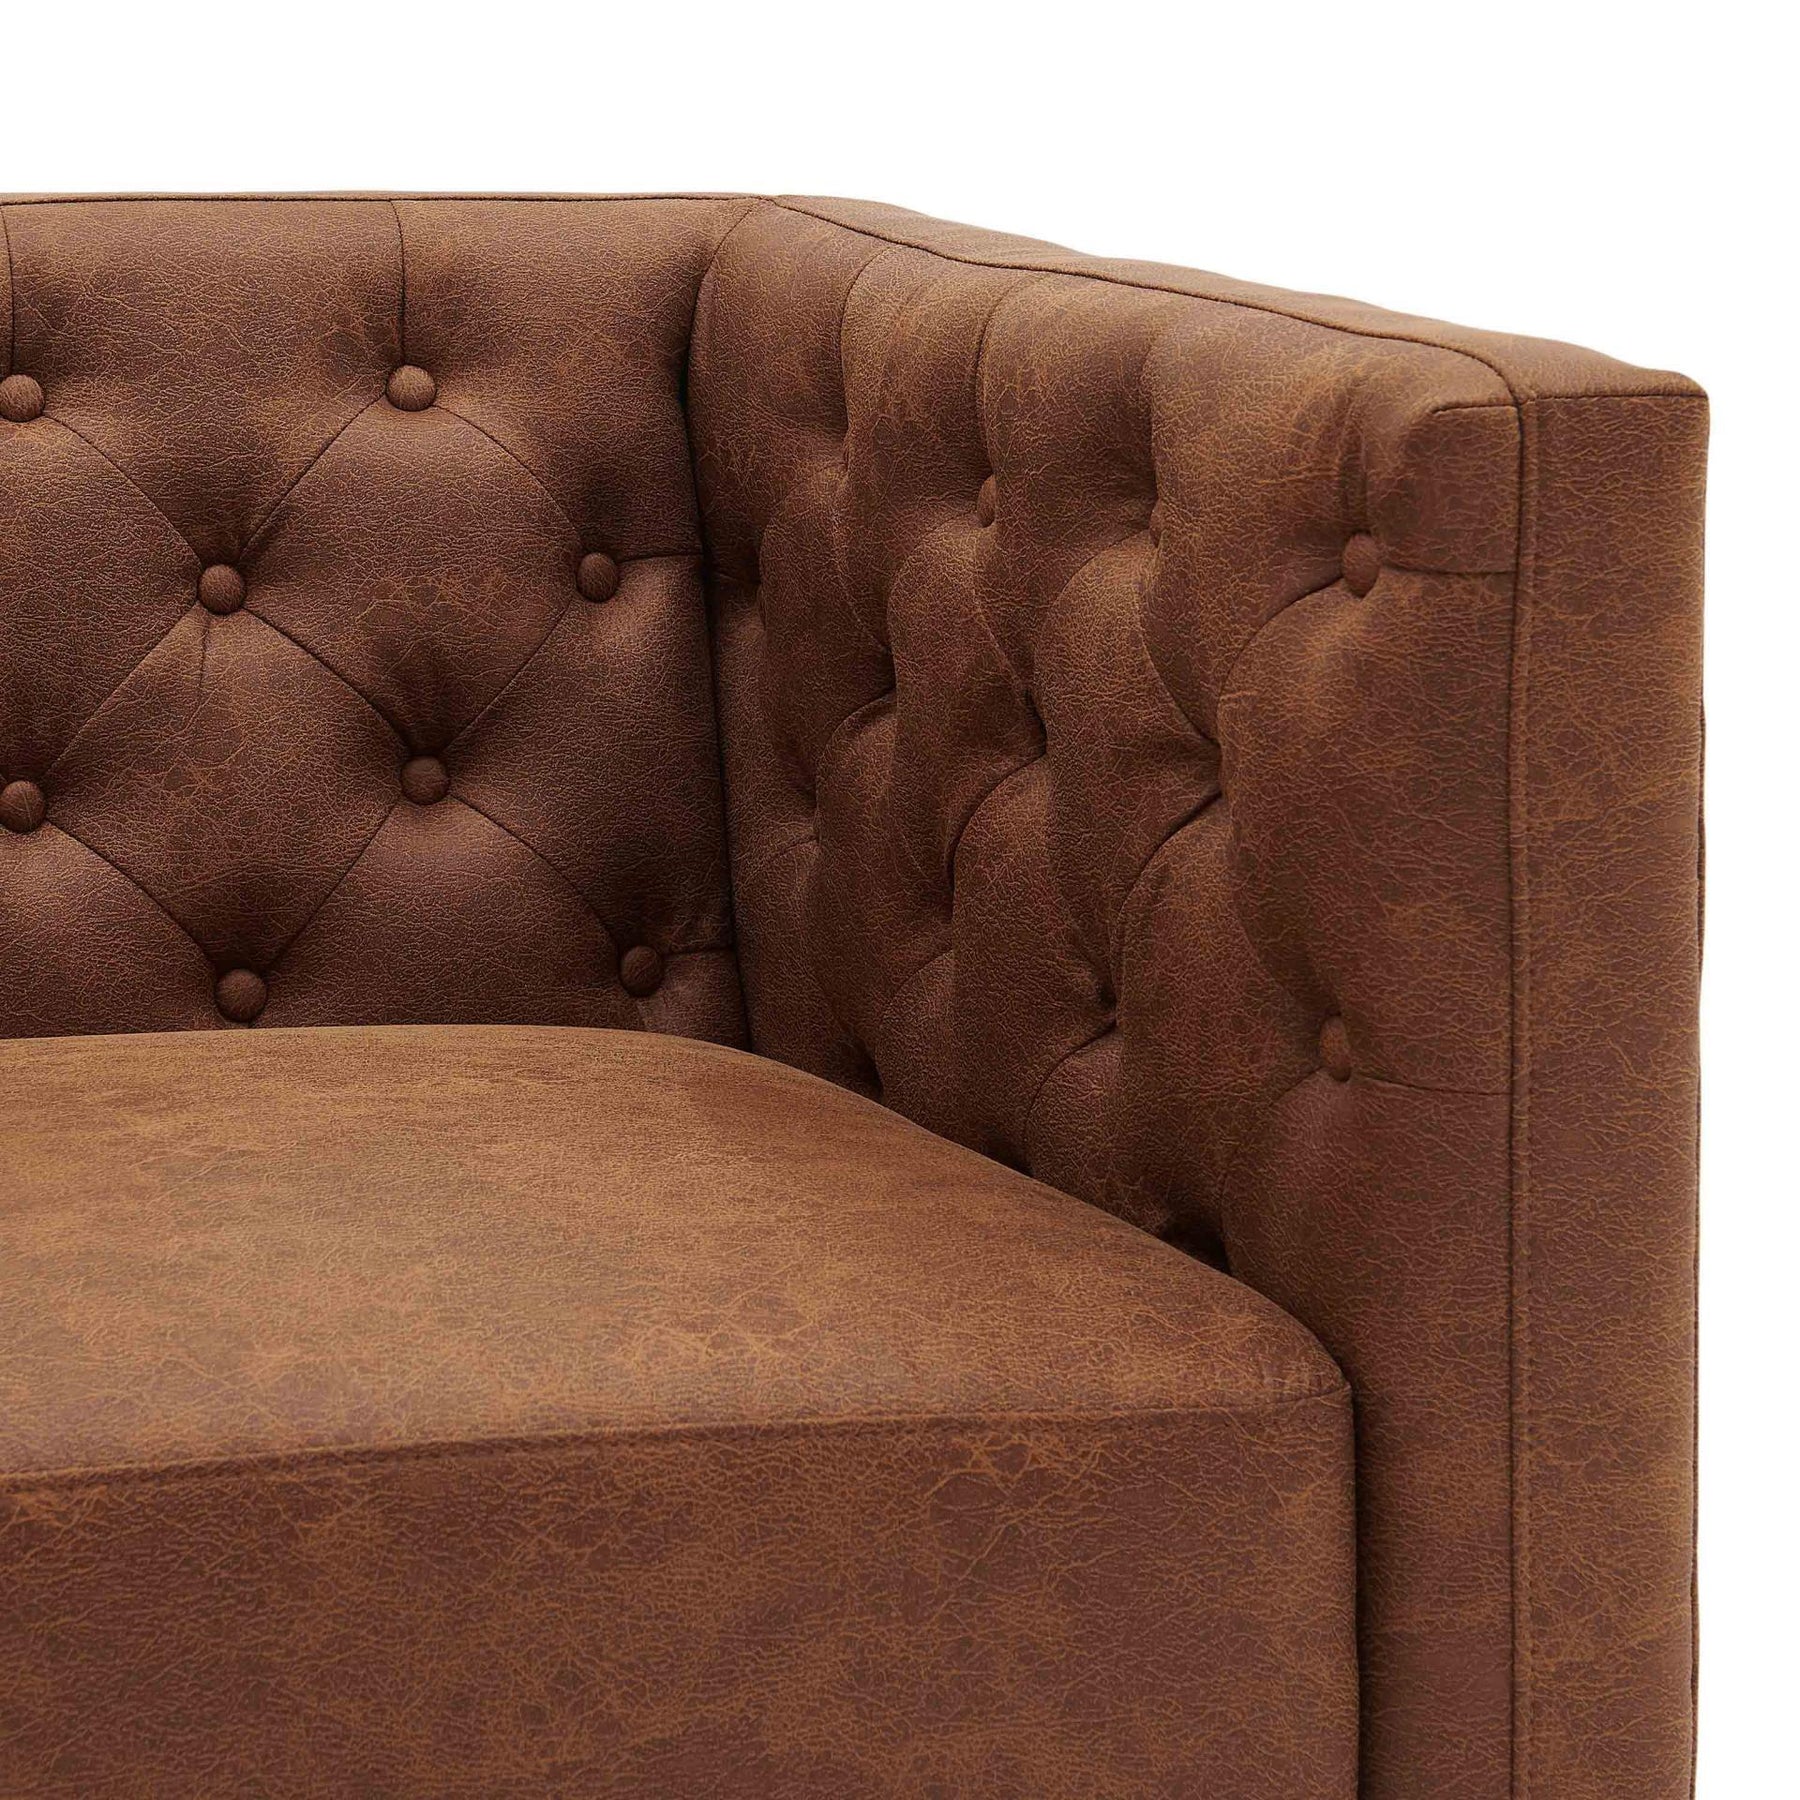 Johnson PU Leather Tufted Accent Chair by New Pacific Direct - 9900072